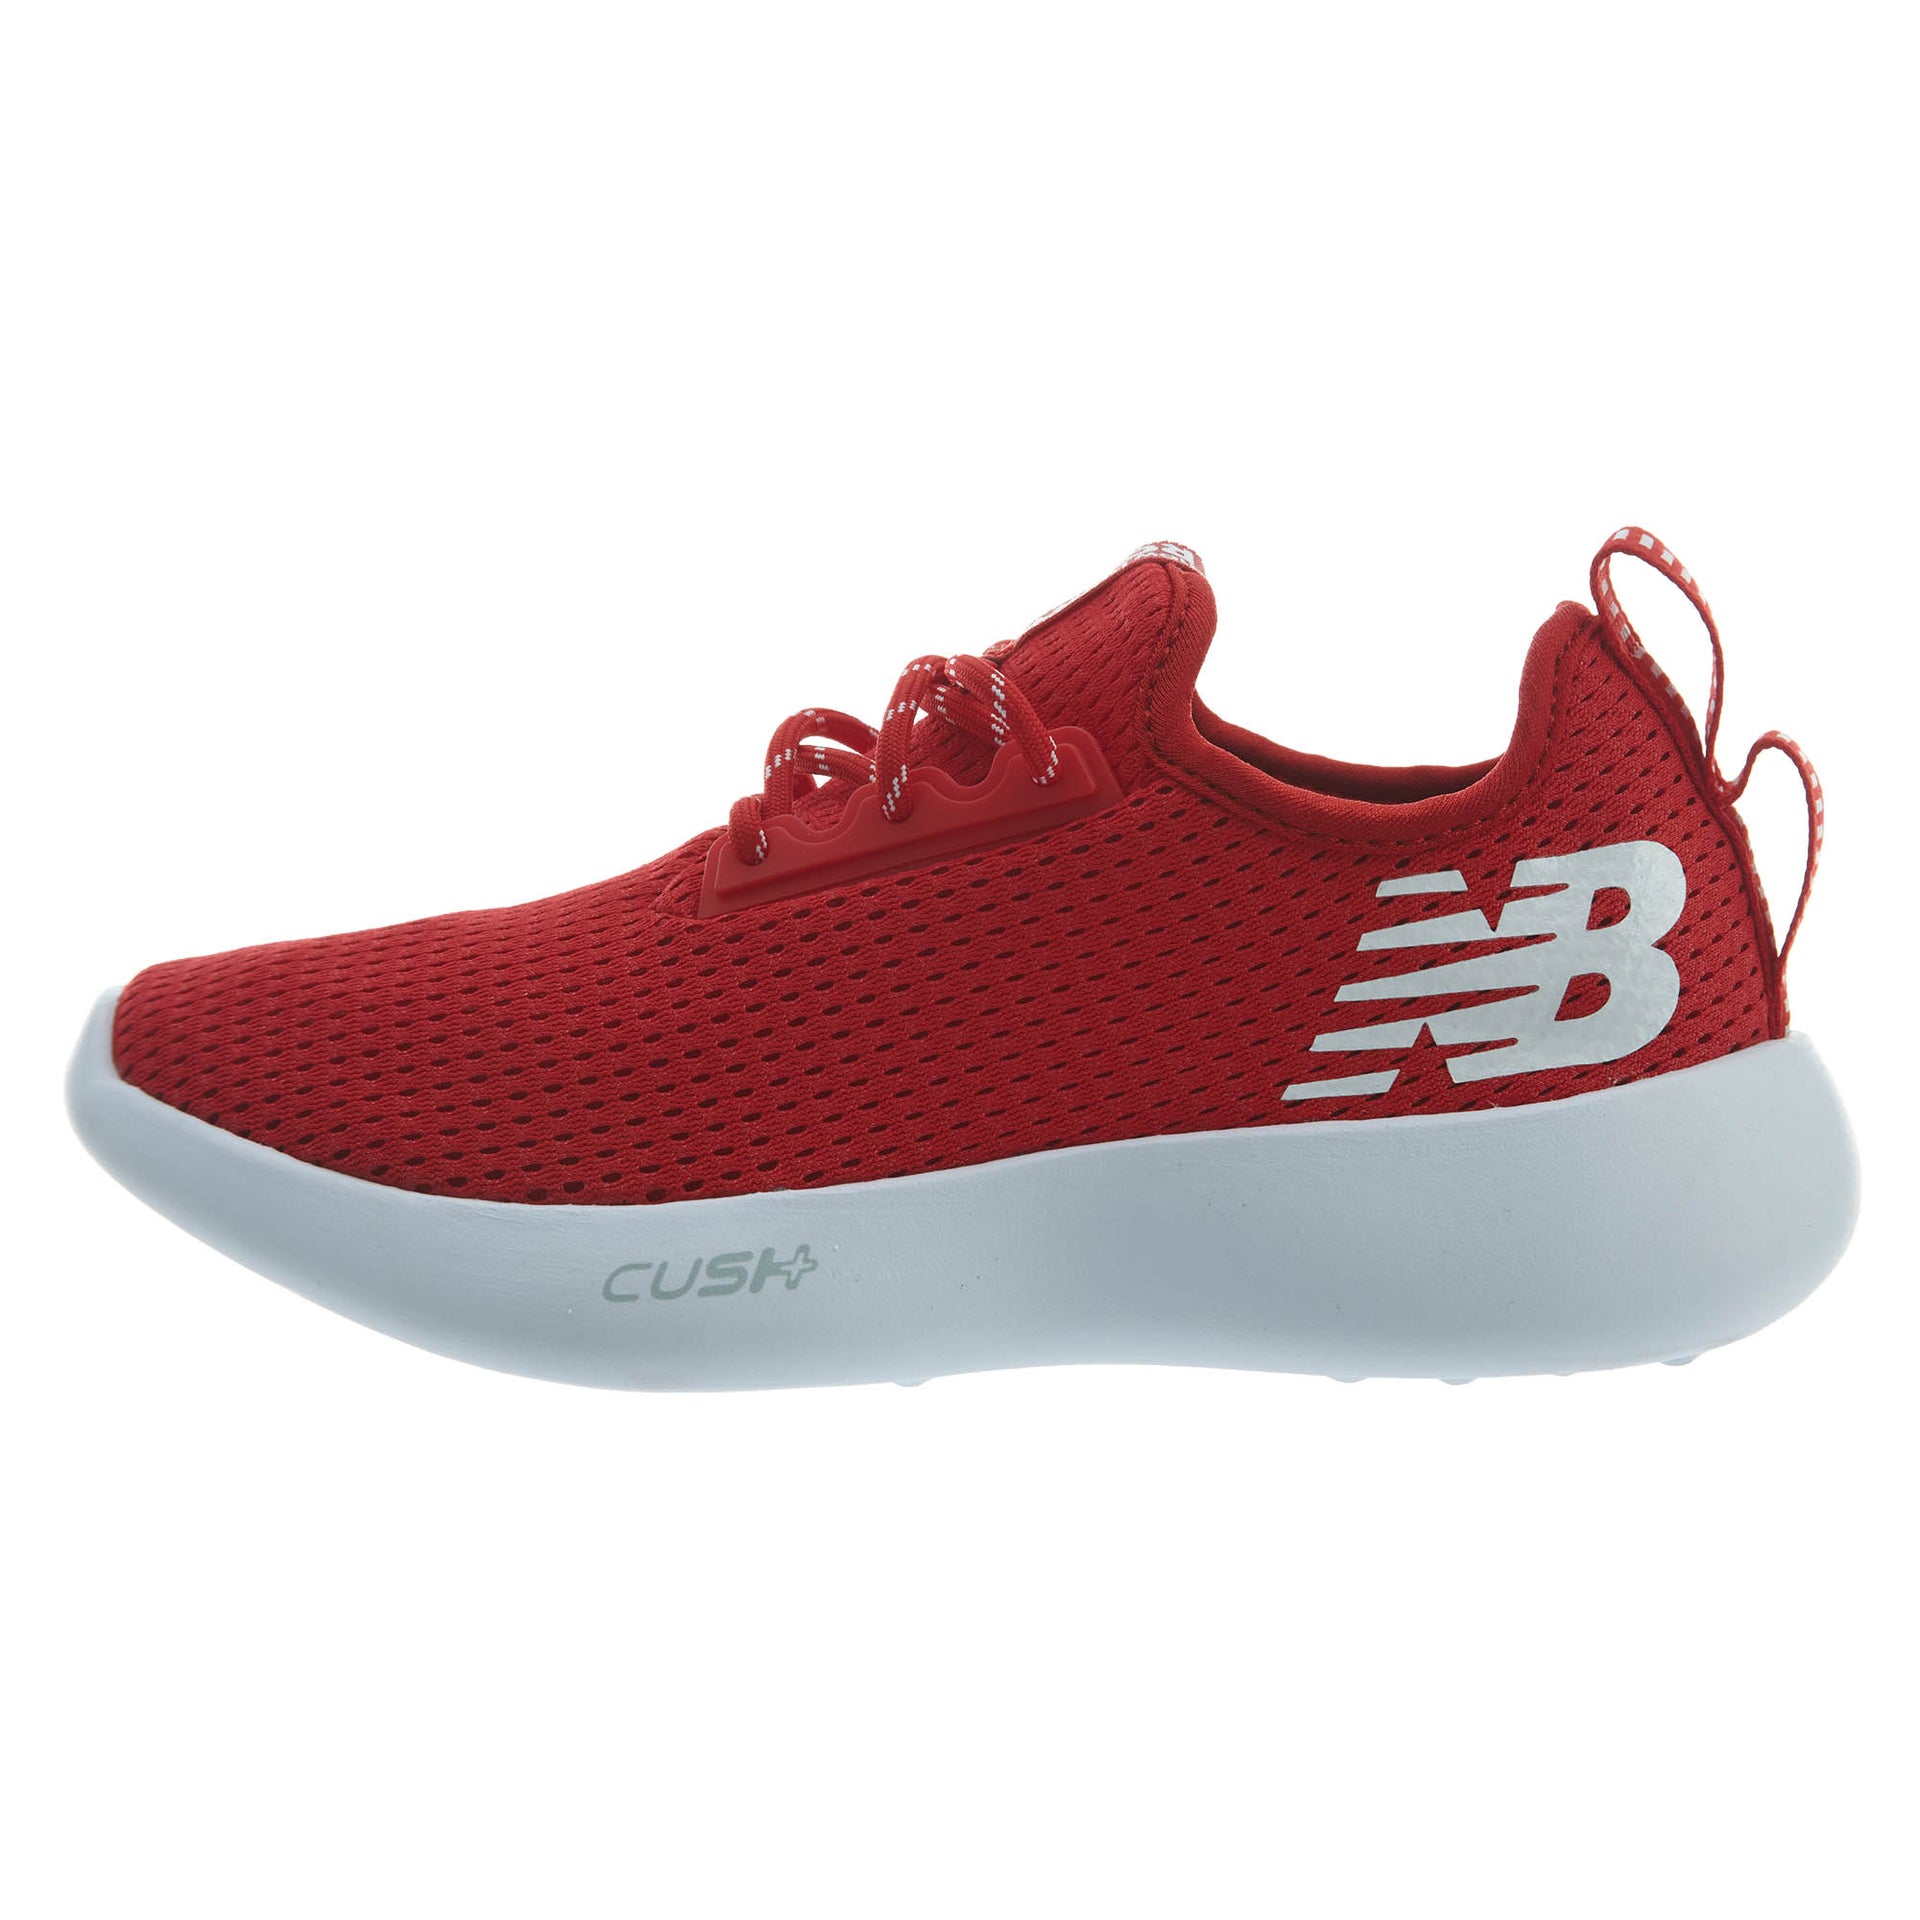 New Balance Recovery V1 Transition Lacrosse Mens Style : Rcvr-YRD